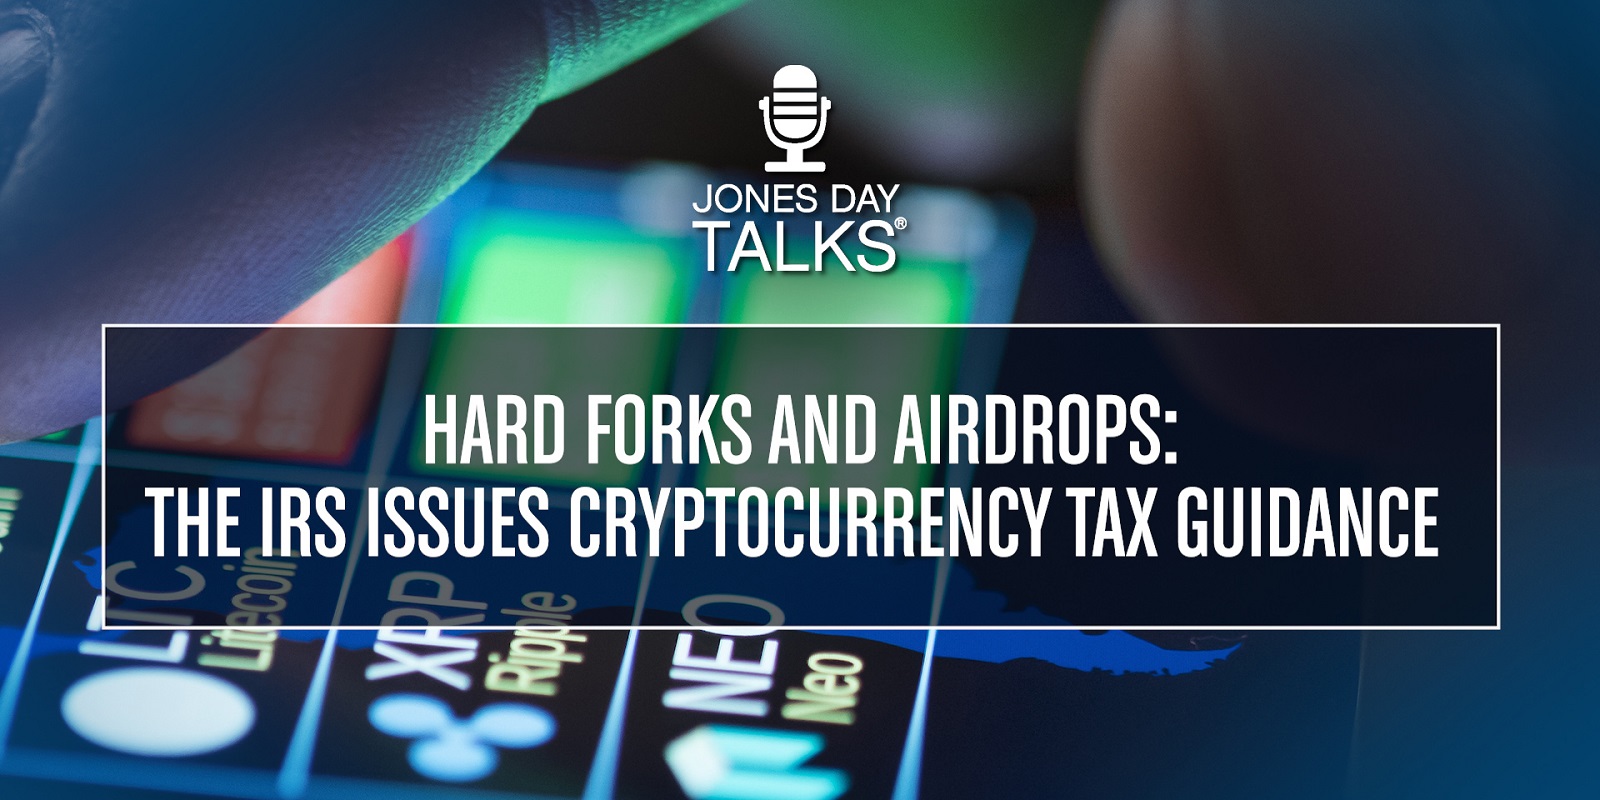 JONES DAY TALKS®: Hard Forks and Airdrops — The IRS Issues Cryptocurrency Tax Guidance